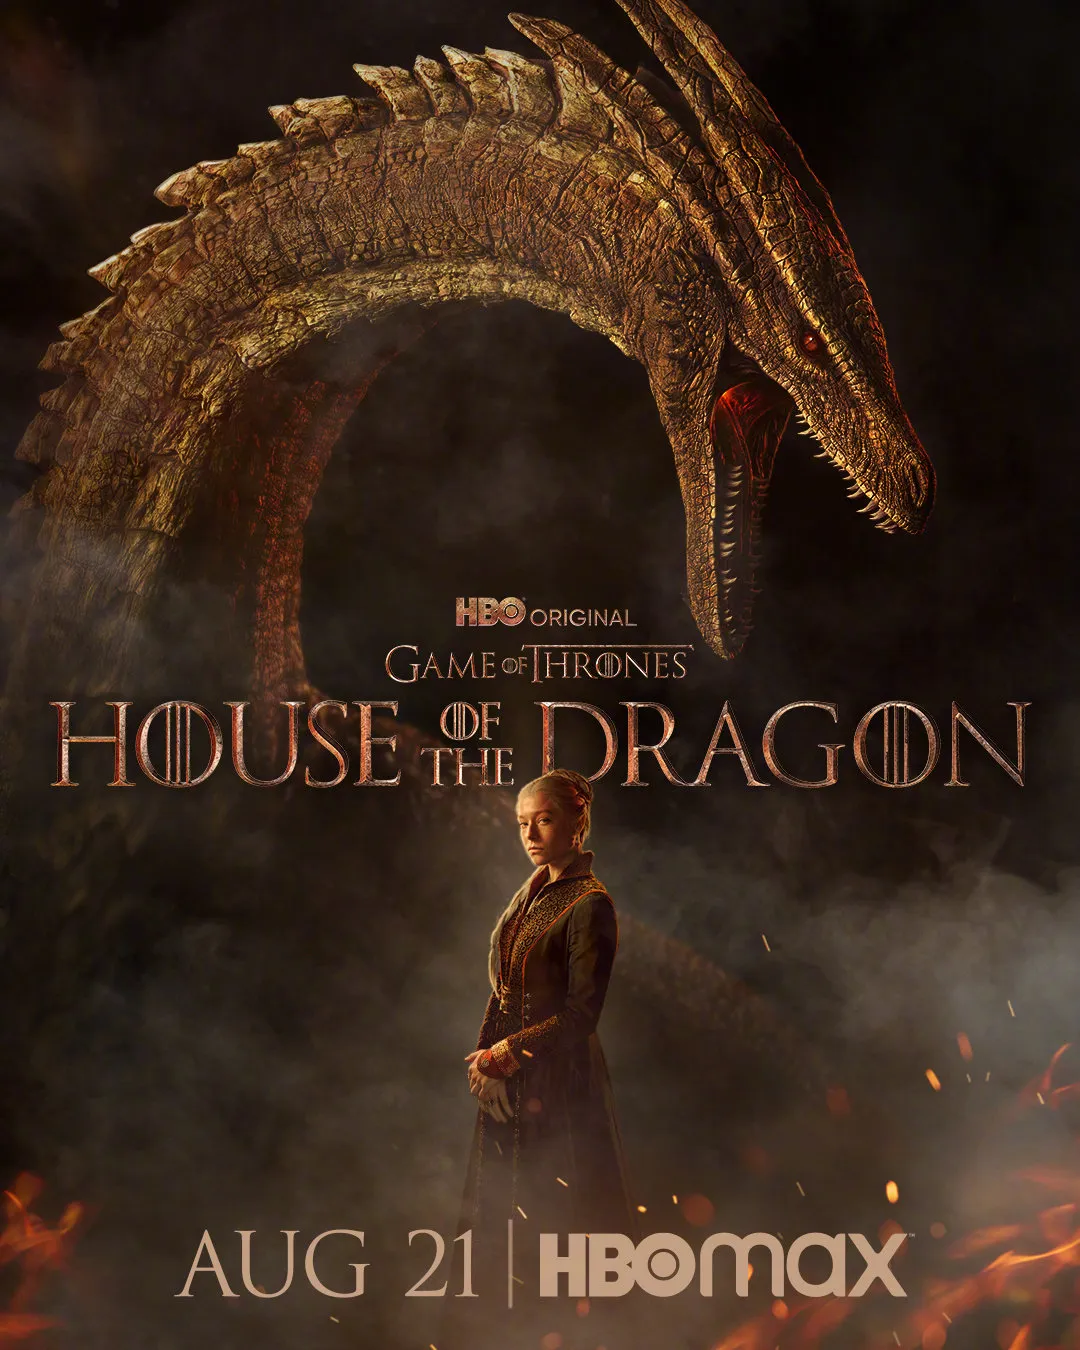 'House of the Dragon' Releases New Poster, Rhaenyra Targaryen and the Dragon | FMV6